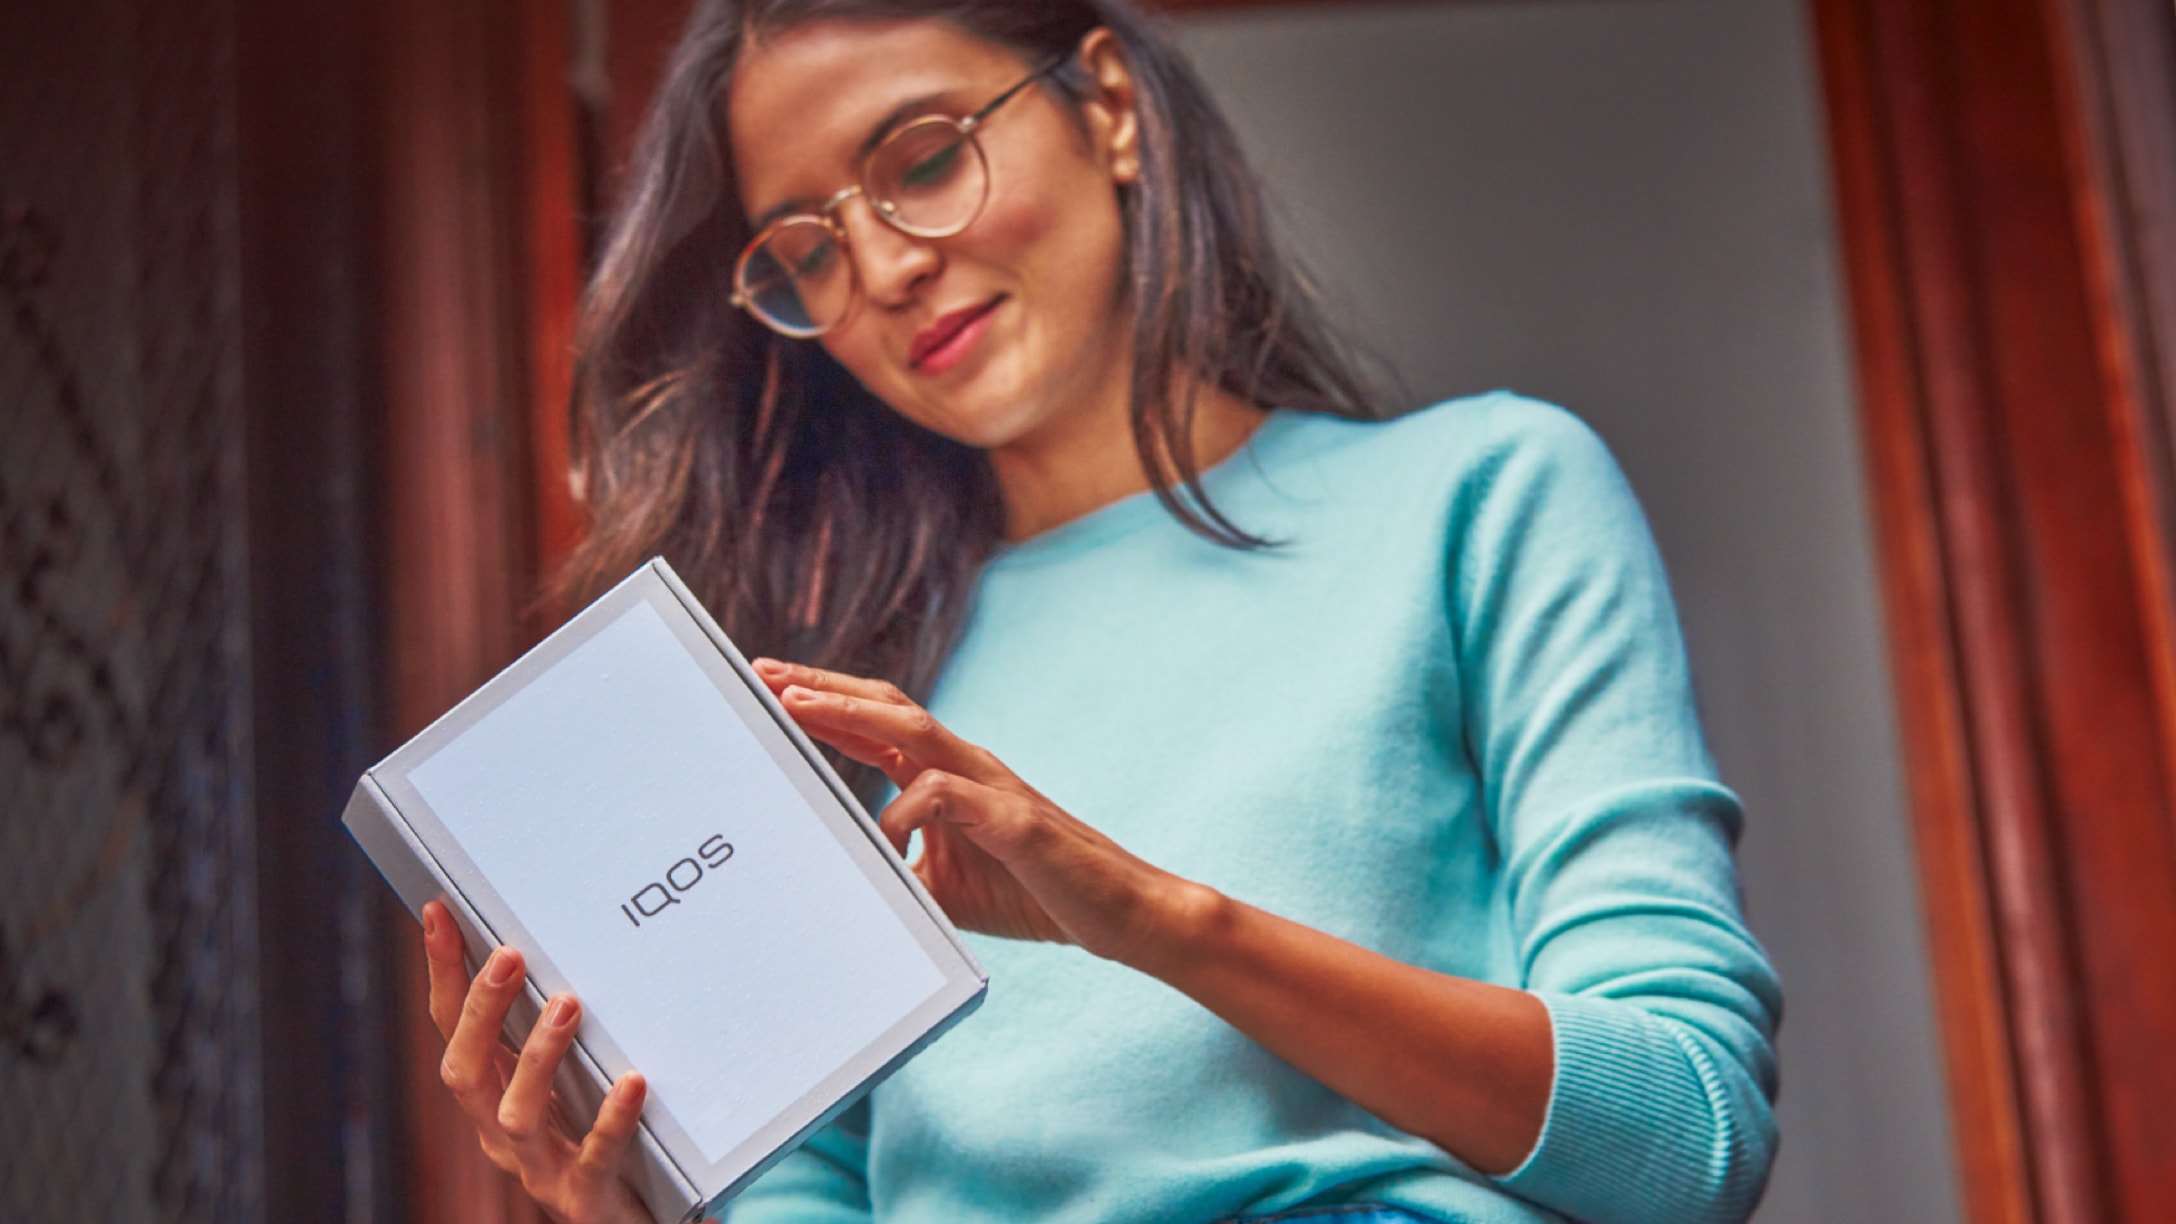 A woman opening a package from IQOS.